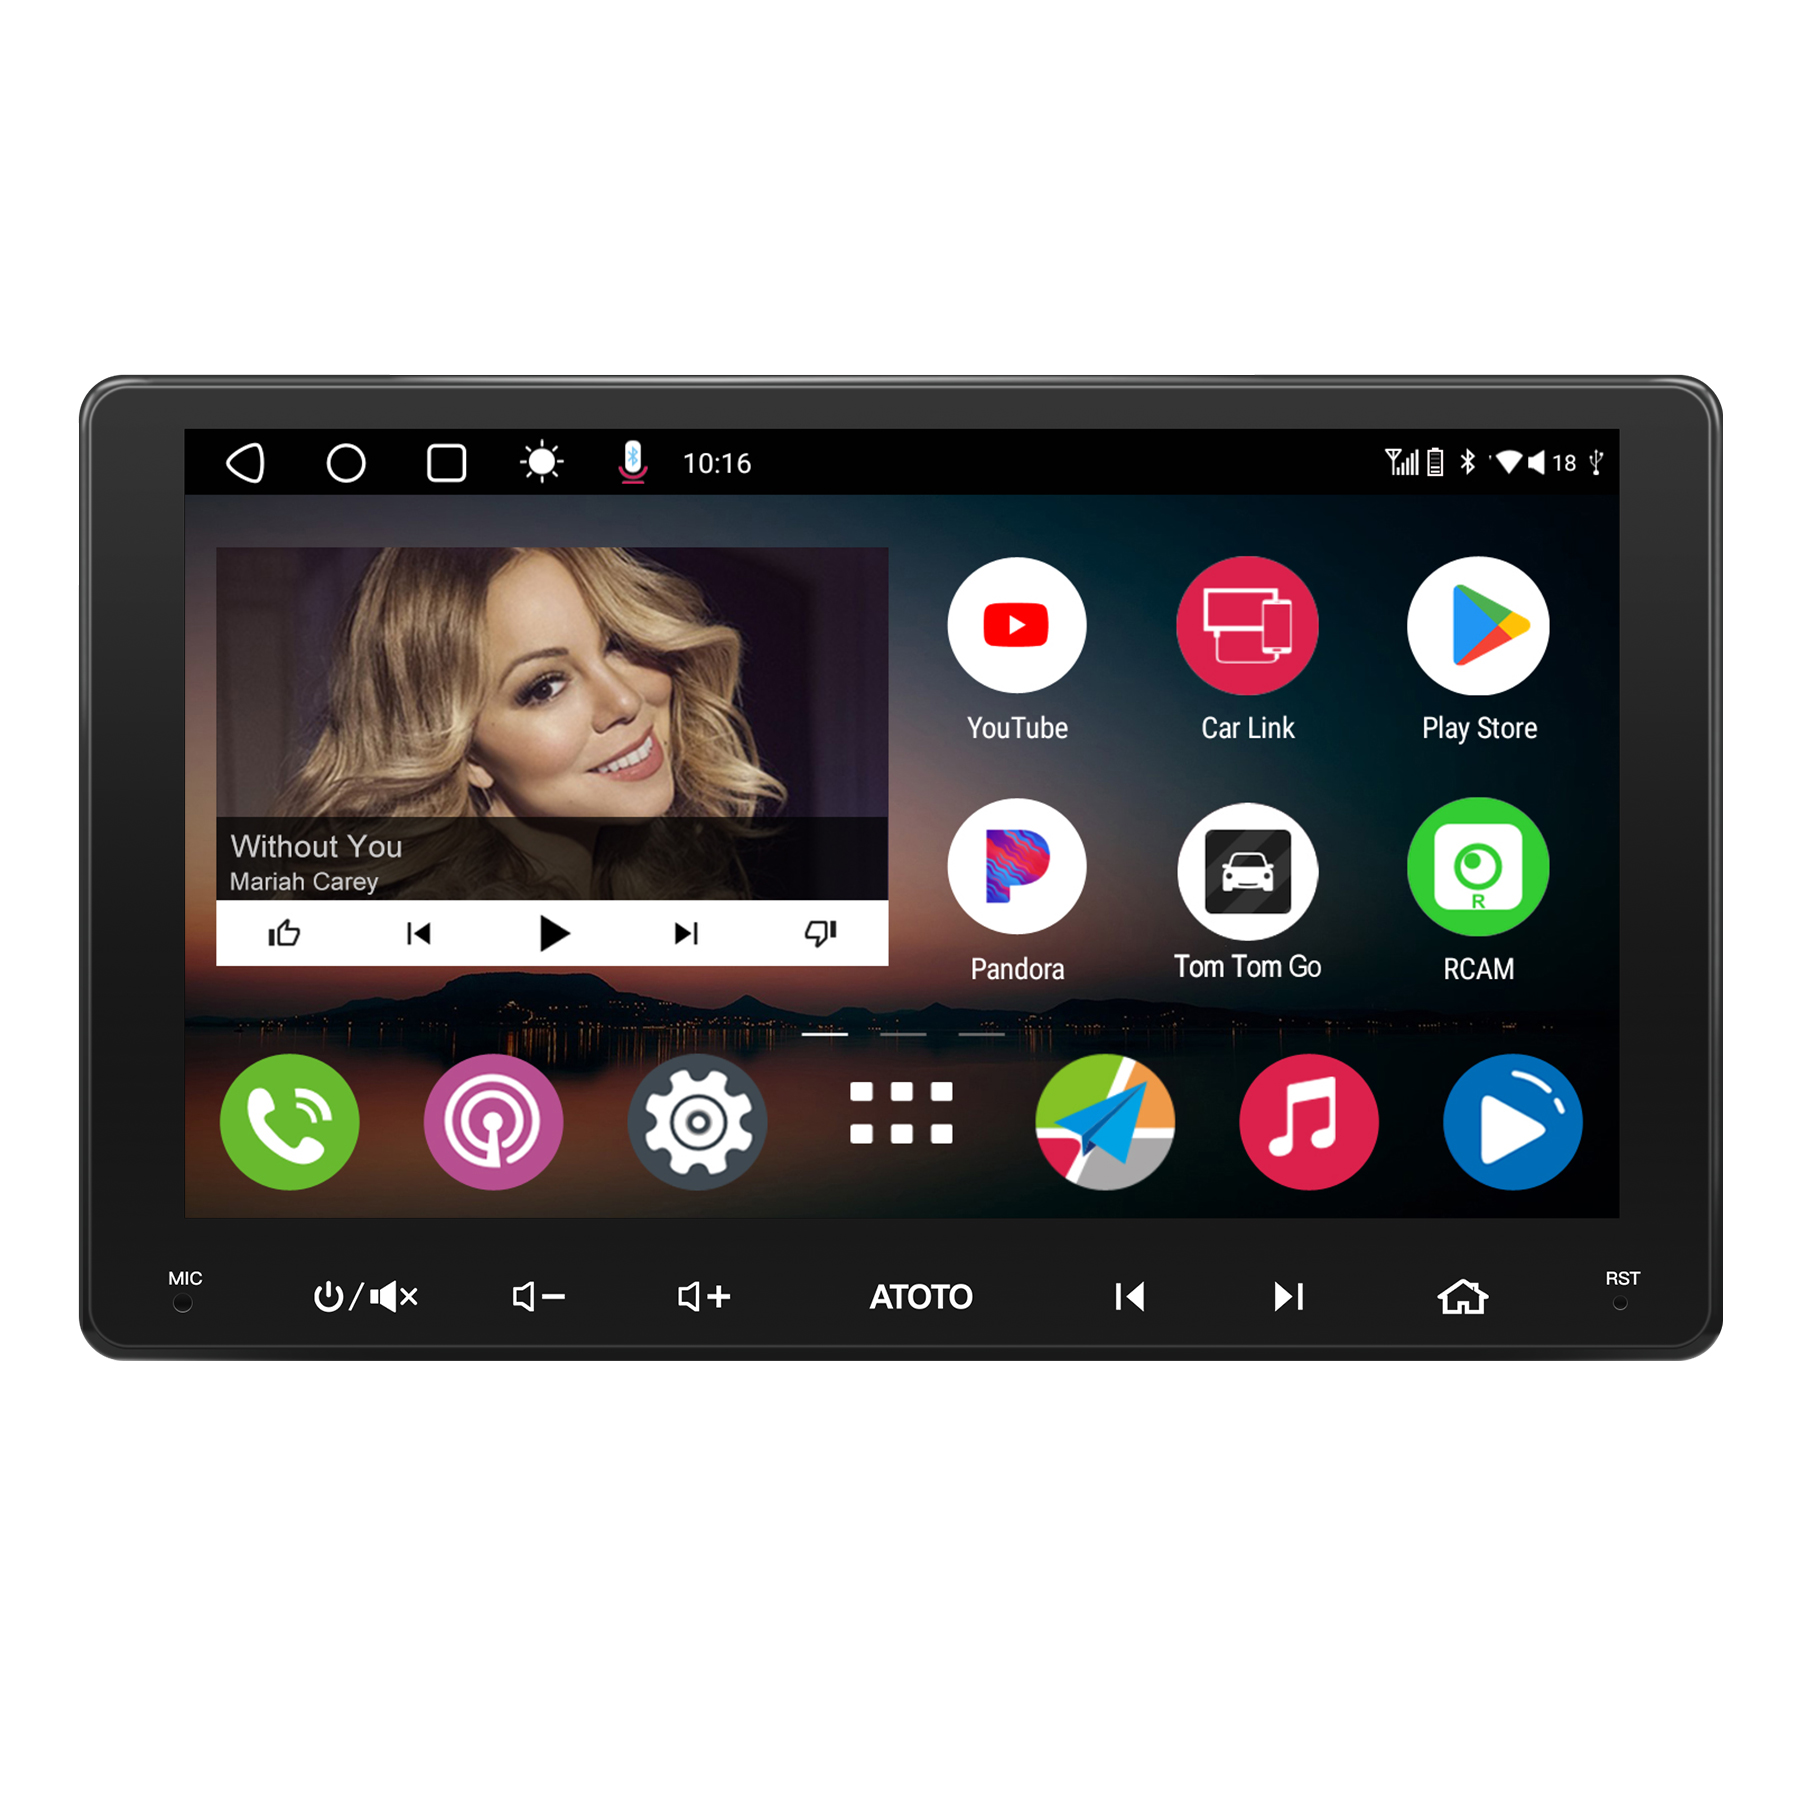 9inch] ATOTO A6 PF Android Double-DIN Car Stereo, Wireless CarPlay